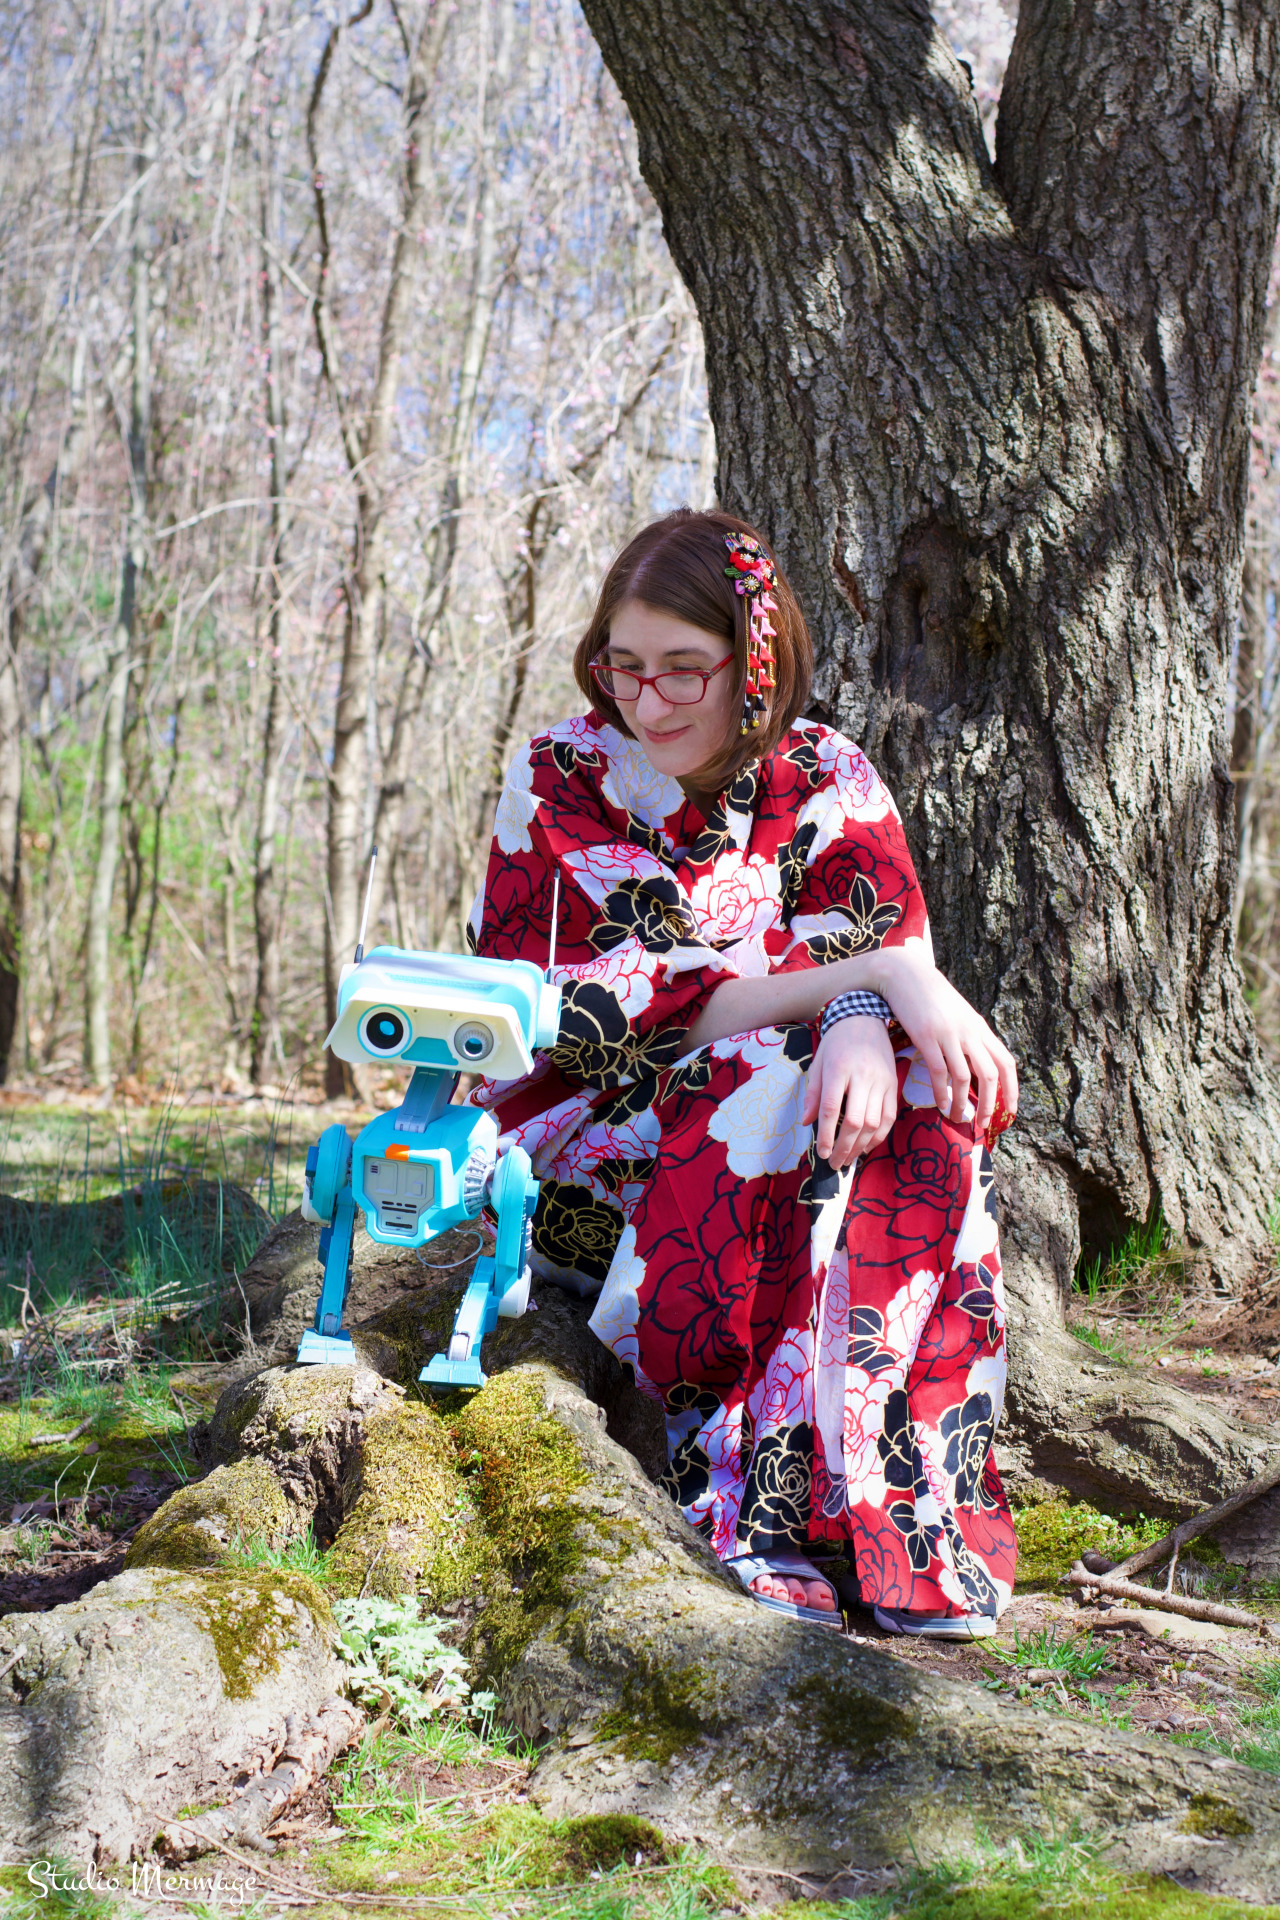 Last Saturday, we visited a park with cherry blossoms for the first day of their cherry blossom festival. I wore my yukata and decided to bring my BD with me, and my sister-in-law got some amazing photos of us hanging out!!This is the outfit I was wearing when the guy asked me if I was doing a “Japanese-inspired Rey costume”  😂 Nope I am just me with my droid!!Check out my SIL’s photography instgram! #actually me#my stuff #idk what else to tag this with lmao  #me being silly in my yukata  #and my very authentic tj maxx sandals  #THEY WERE 16 BUCKS OK #VERY COMFORTABLE #im not wearing geta i dont wanna break my fuckin ankles